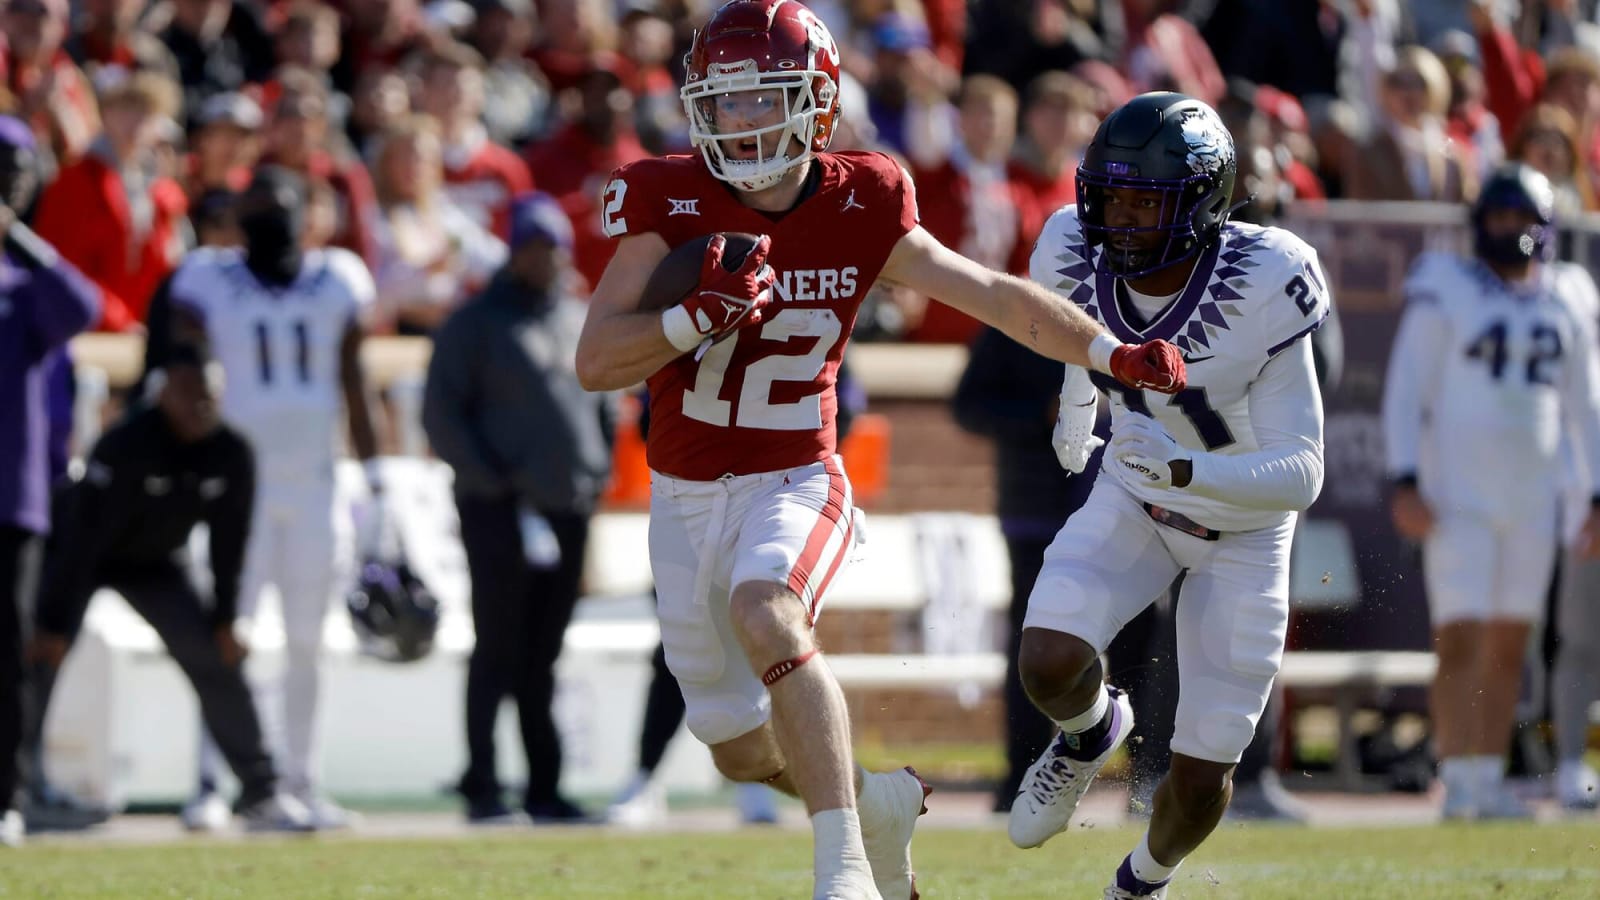  Former Oklahoma Football Star WR Drake Stoops Snubbed From NFL Combine; Wideout Won’t Join 3 Fellow Sooners at Talent Showcase – Report